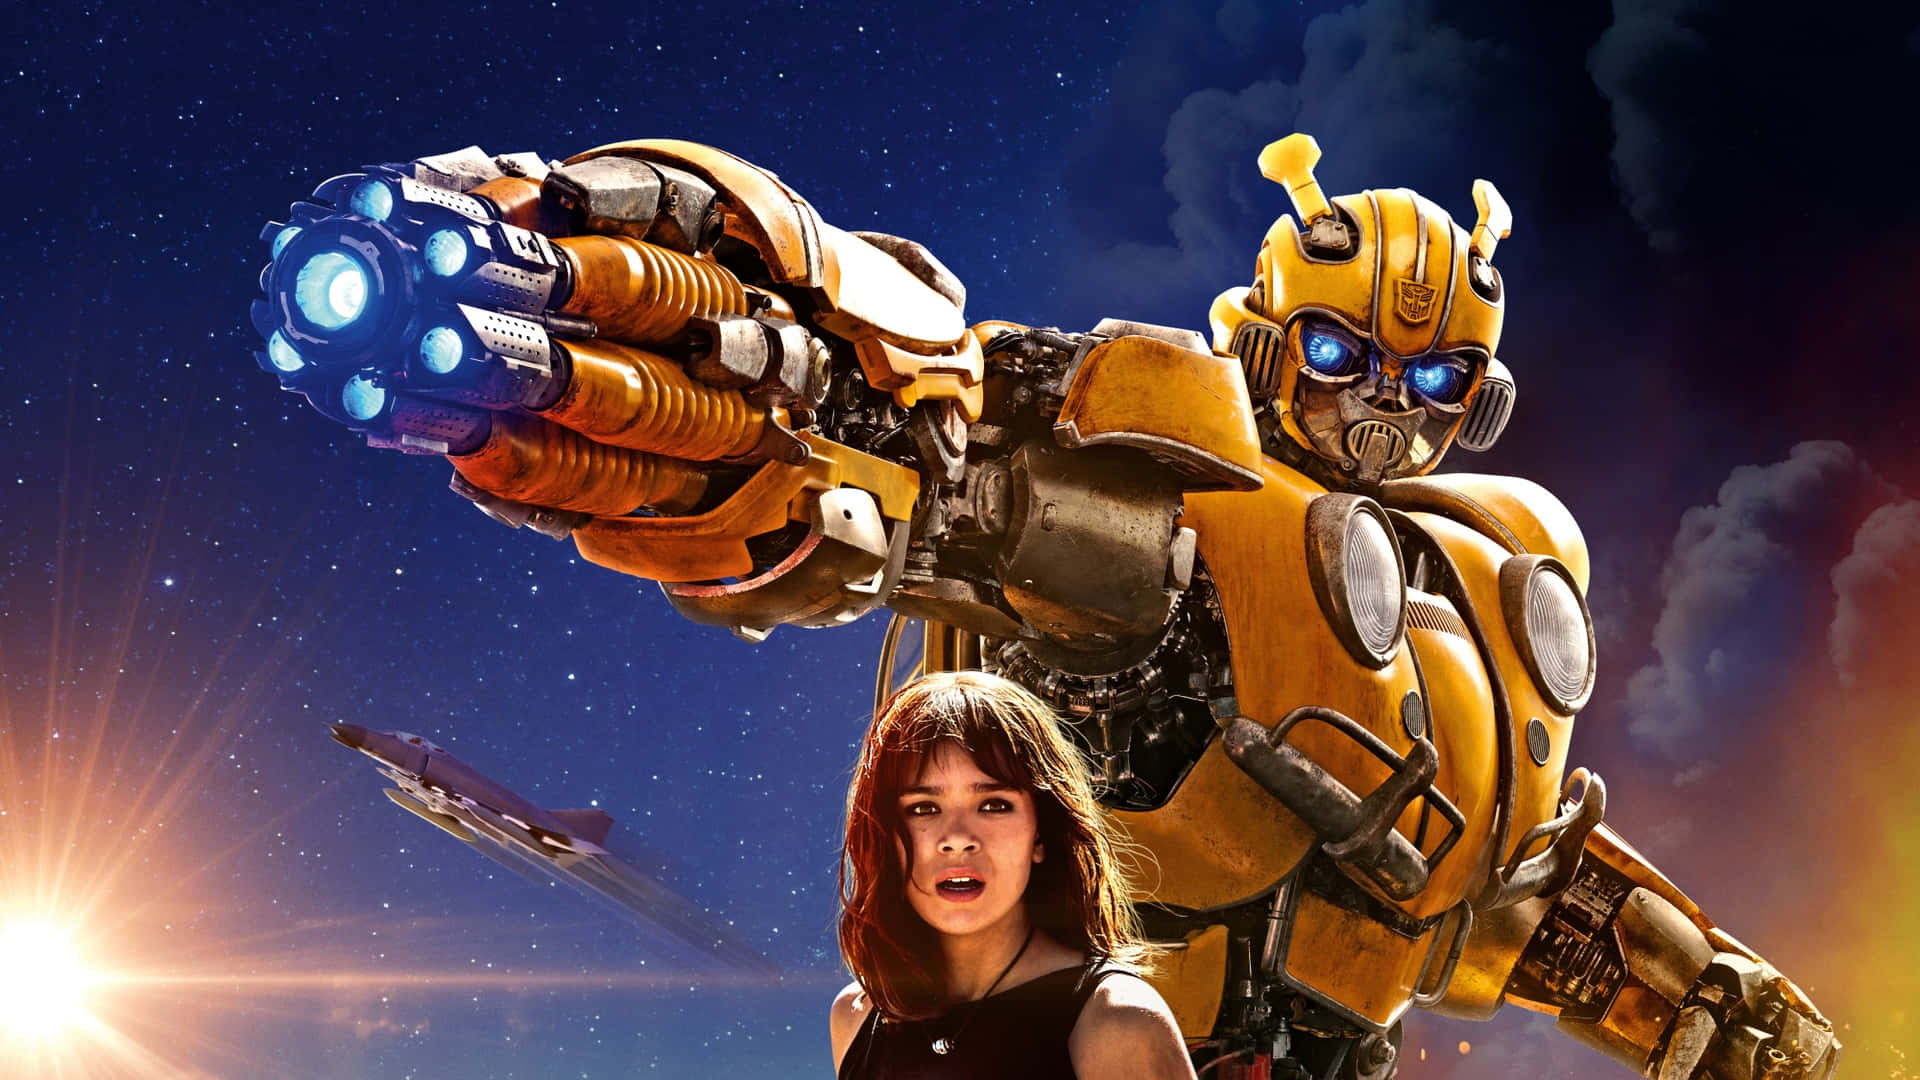 Transformers The Movie Poster With A Woman And A Robot